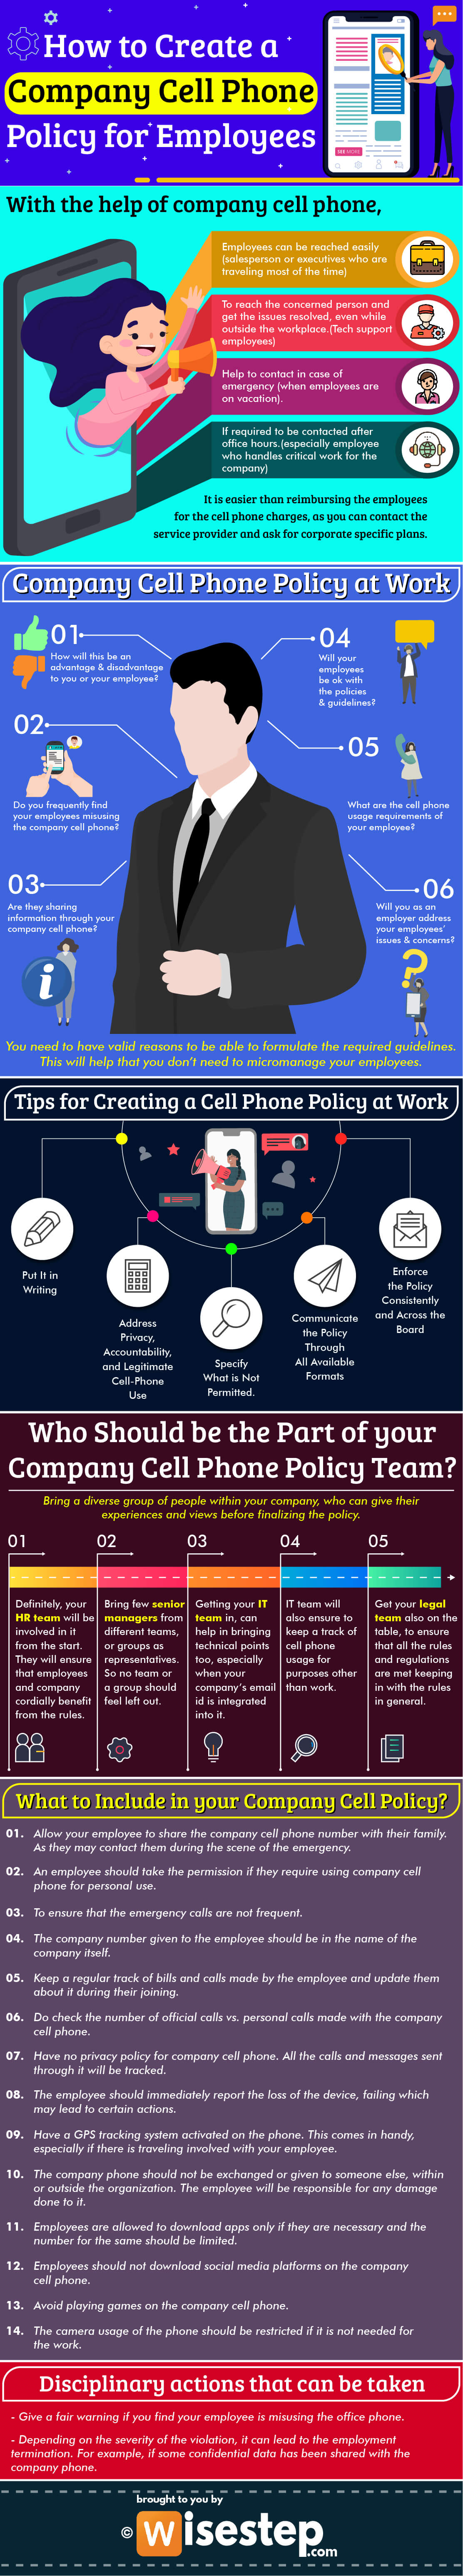 Company Cell Phone Policy